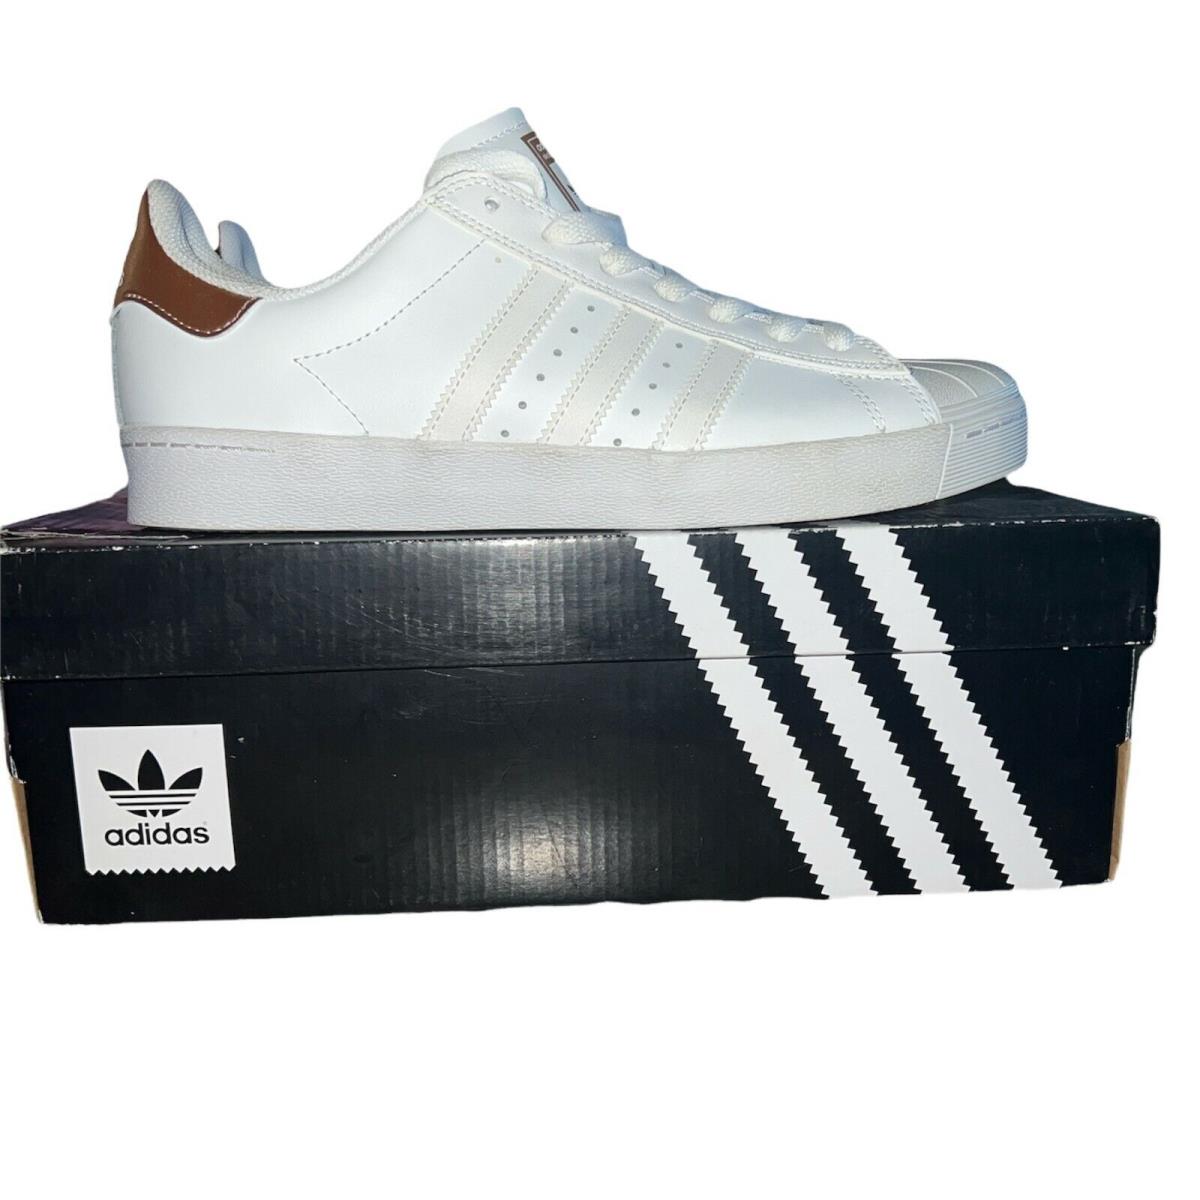 Adidas Mens Superstar Vulc Adv BB8611 White Lace Up Skateboarding Shoes Size 7